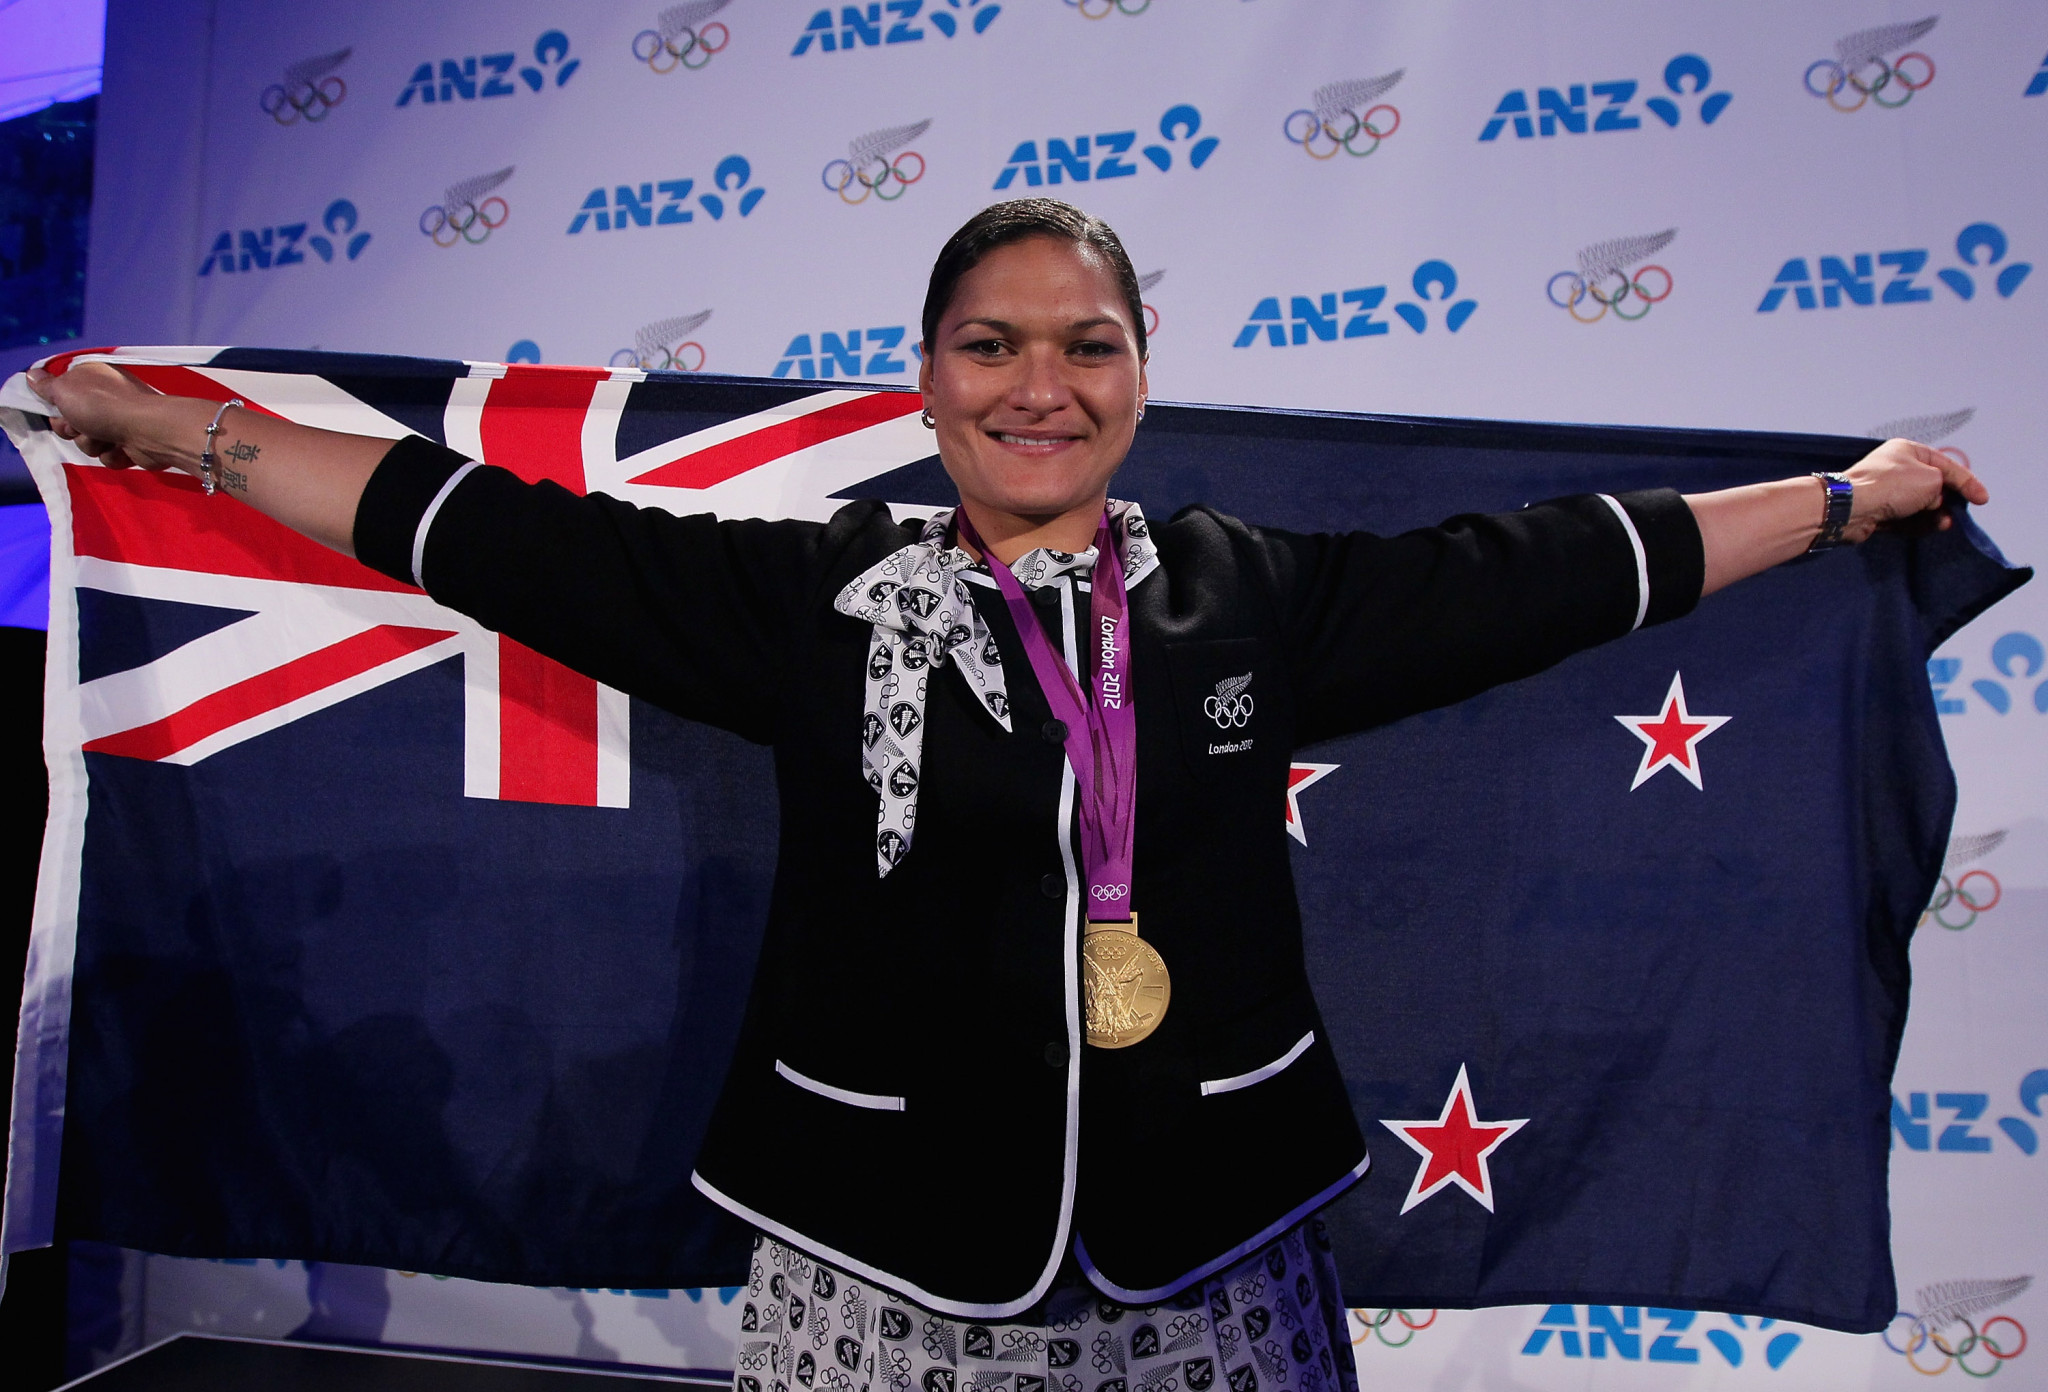 Dame Valerie Adams of New Zealand successfully defended her Olympic title at London 2012 during a 56-competition winning streak ©Getty Images